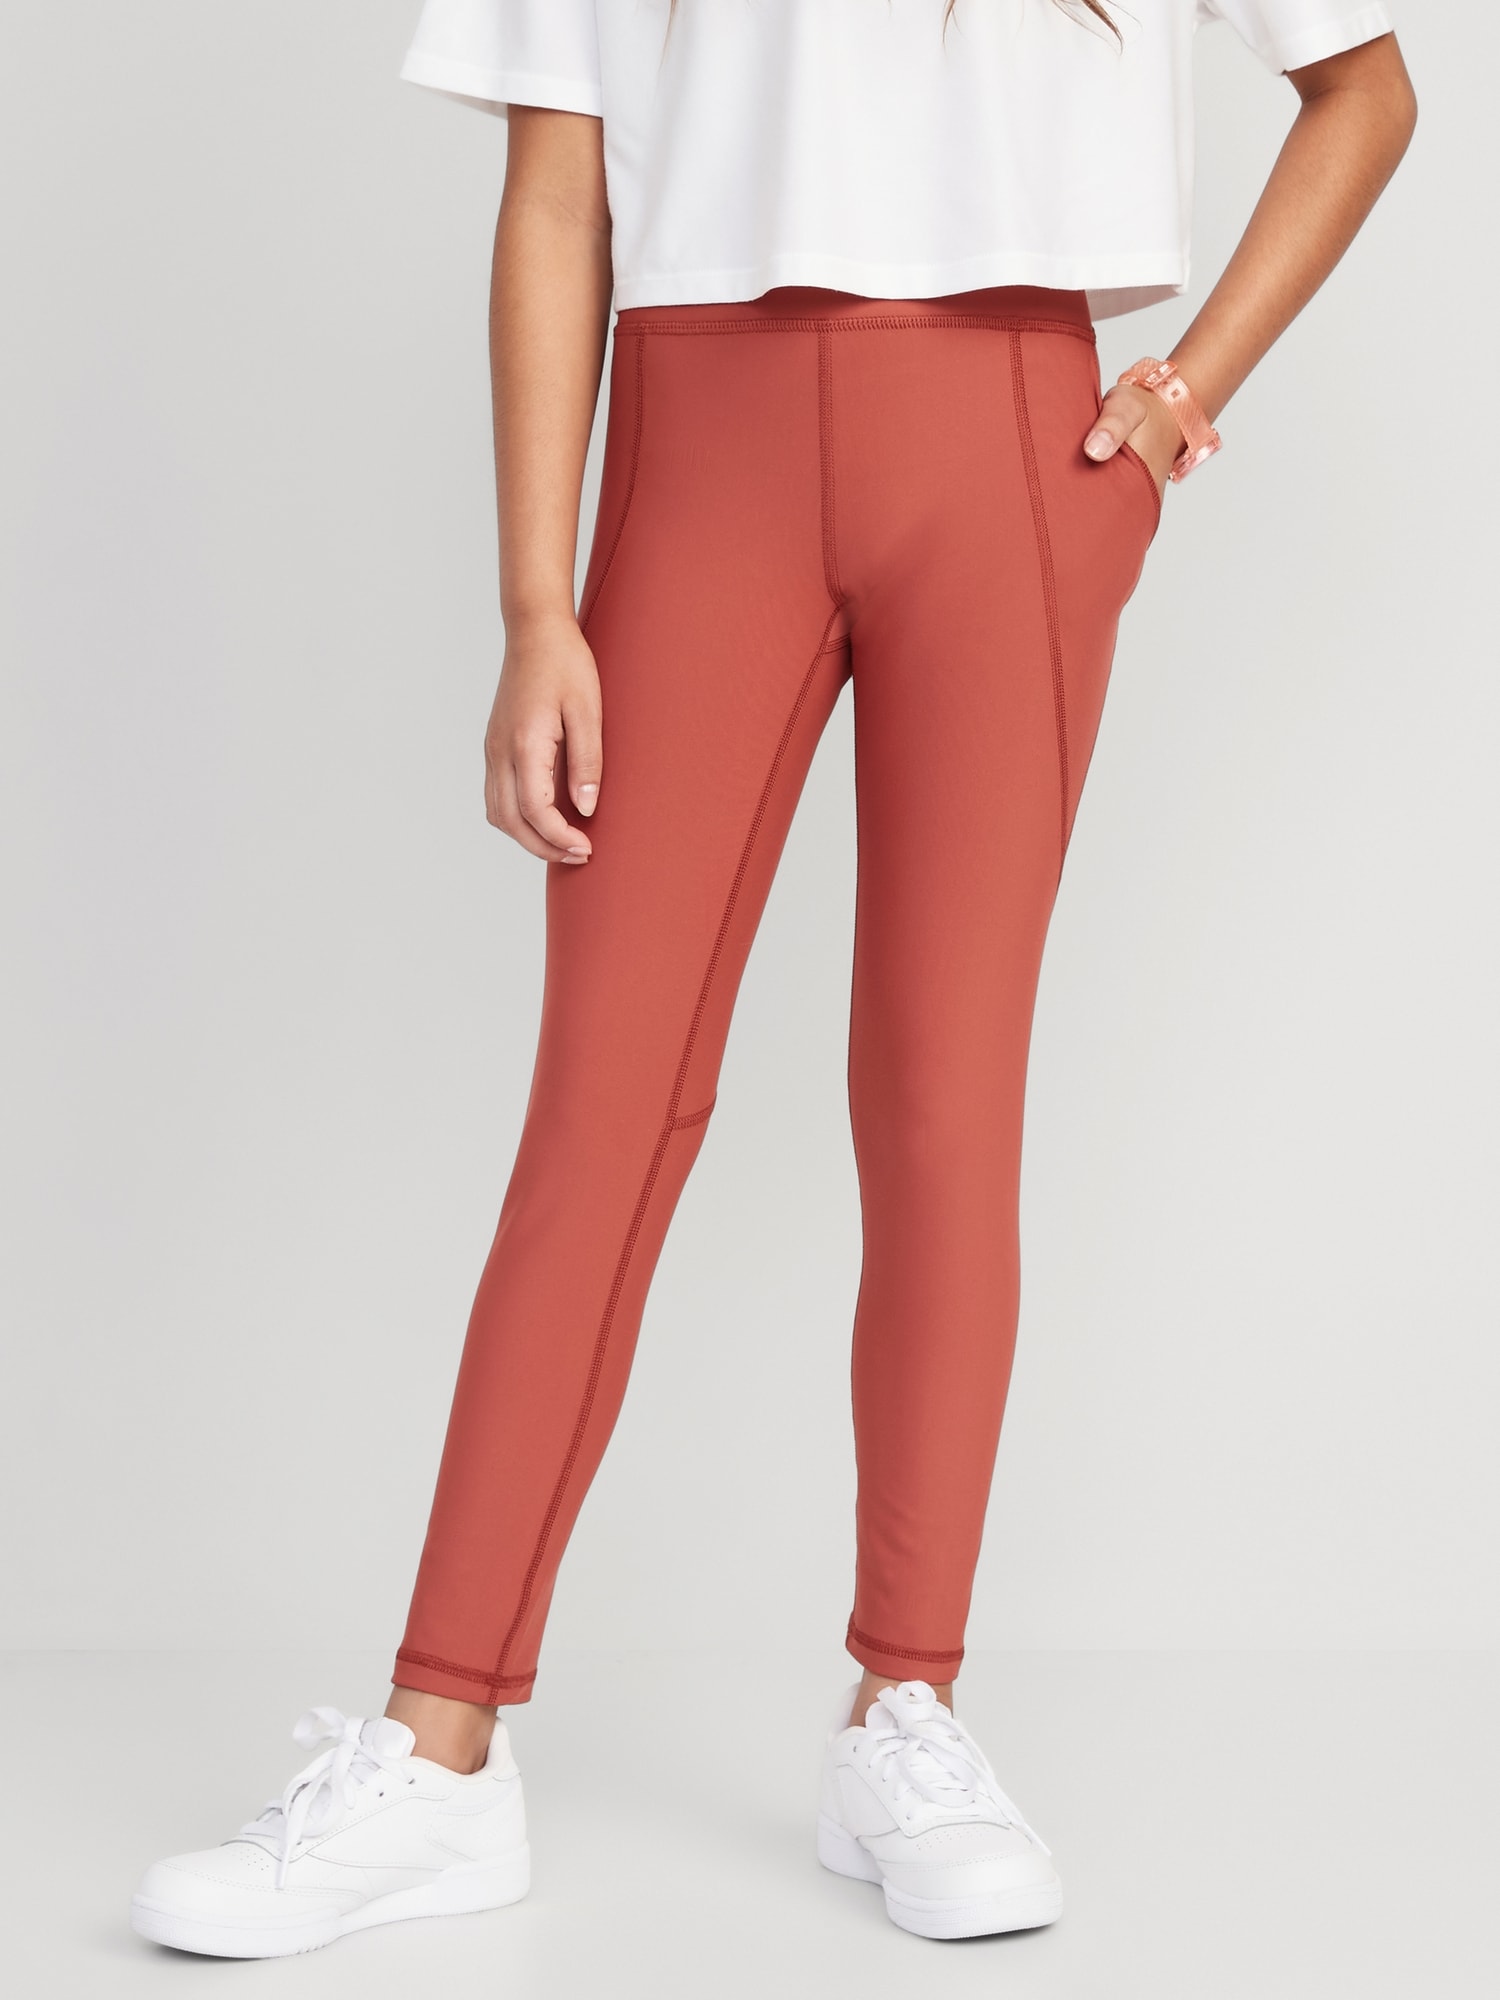 Old Navy High-Waisted PowerSoft 7/8 Leggings for Girls red - 768655283